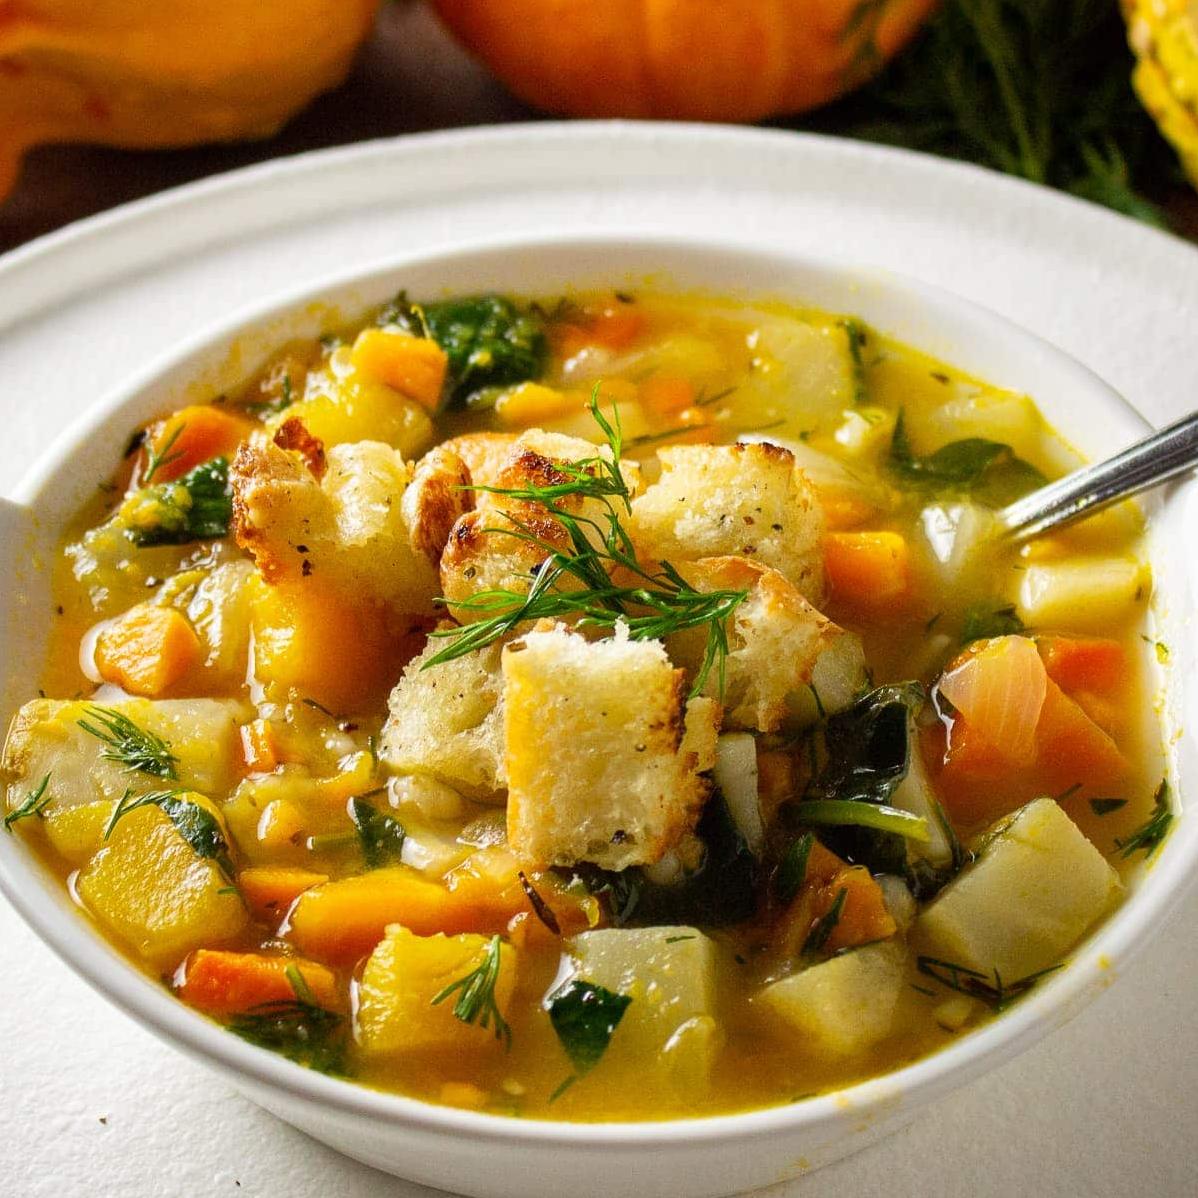  Cozy up with a bowl of this hearty root soup.